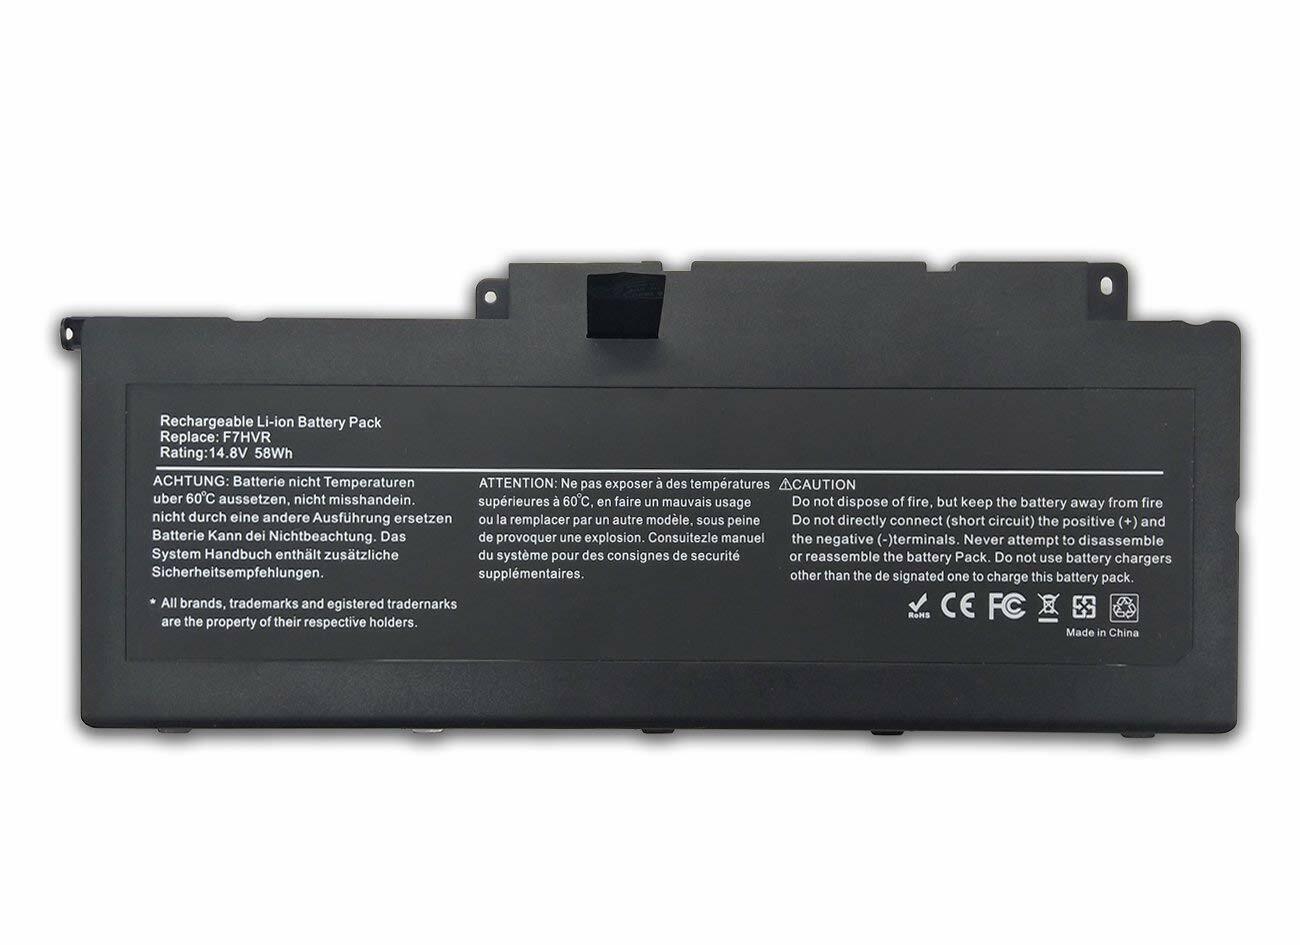 NEW Battery for Dell Inspiron 15 7537 ,17 7737 Series F7HVR 062VNH G4YJM T2T3J